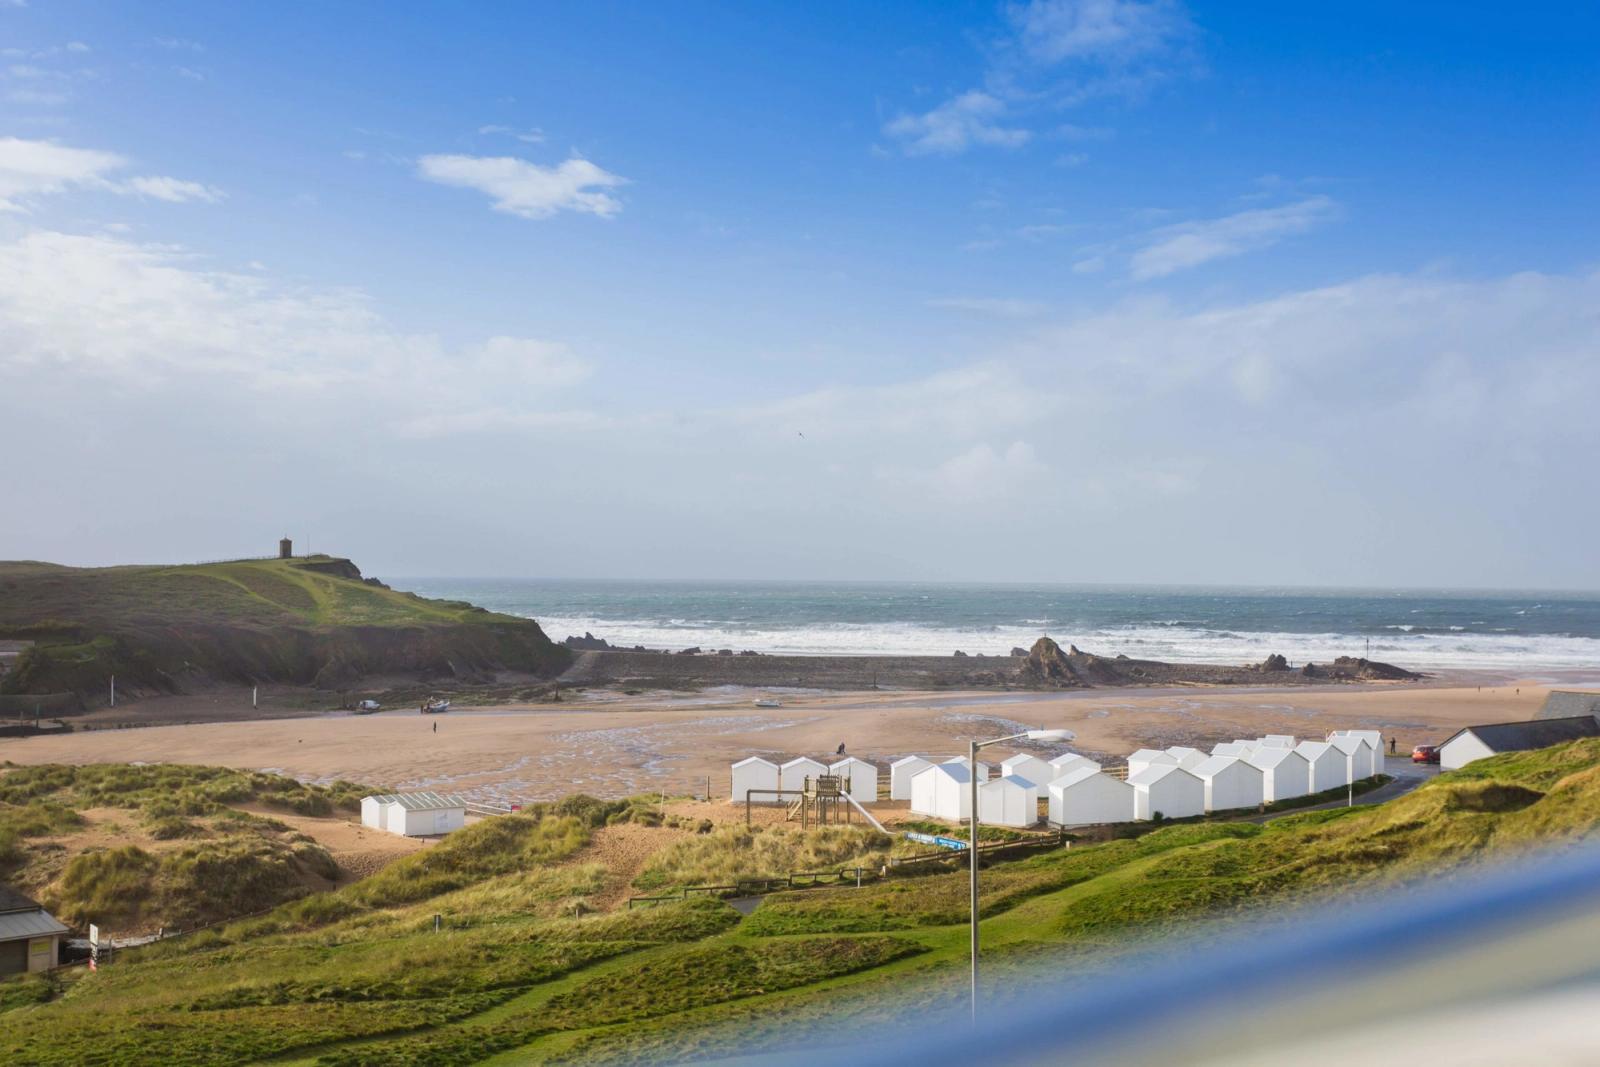 10 of the best beach hotels on the South Coast